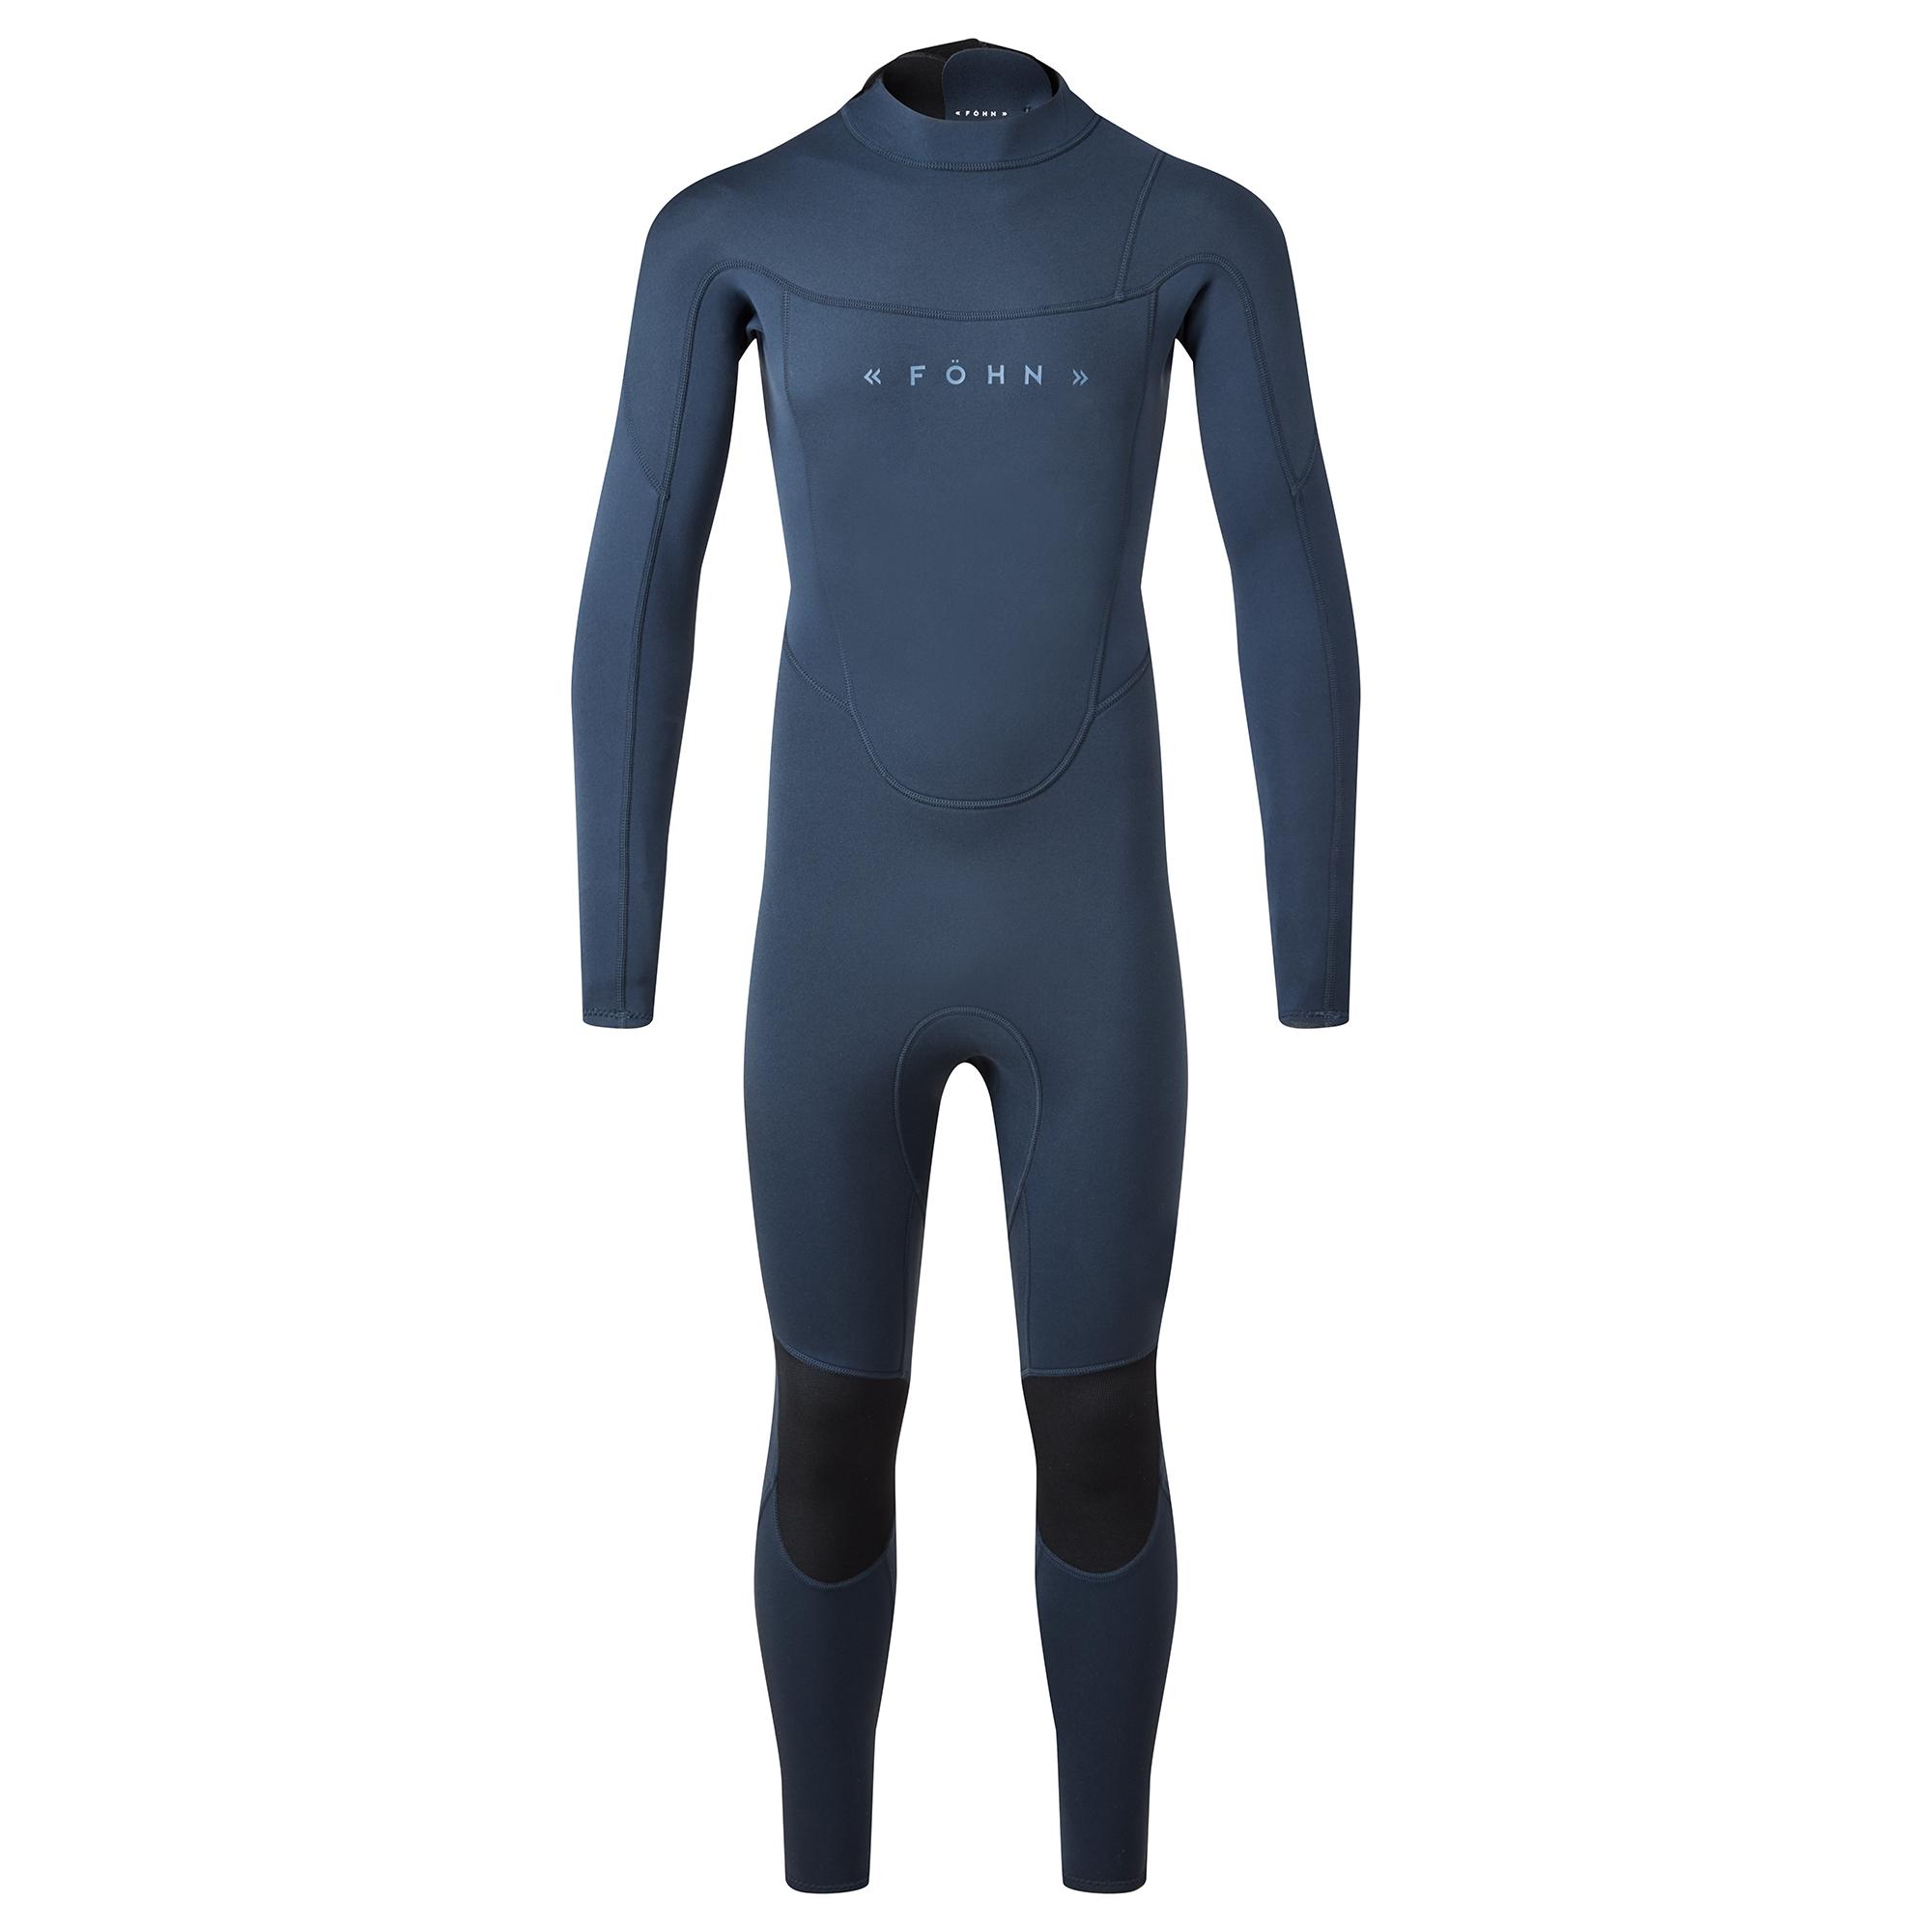 Fhn 3/2mm Wetsuit - Navy